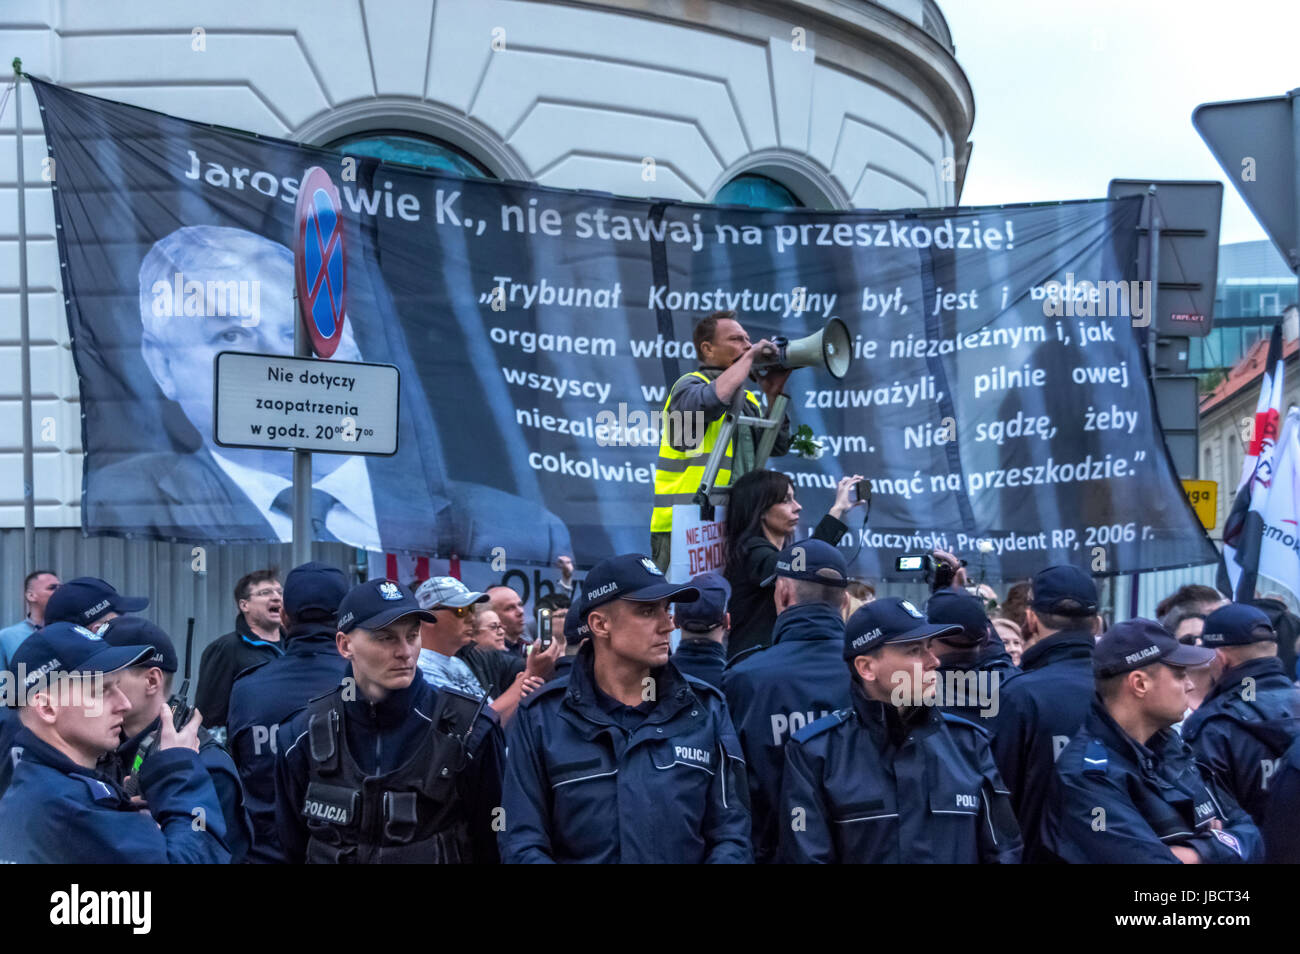 Warsaw, Poland - June 10th, 2017: Members of Polish security forces watch over as anti-government protesters block the Polish capital during the 86th monthly anniversary of the Smolensk crash in April, 2010. Stock Photo